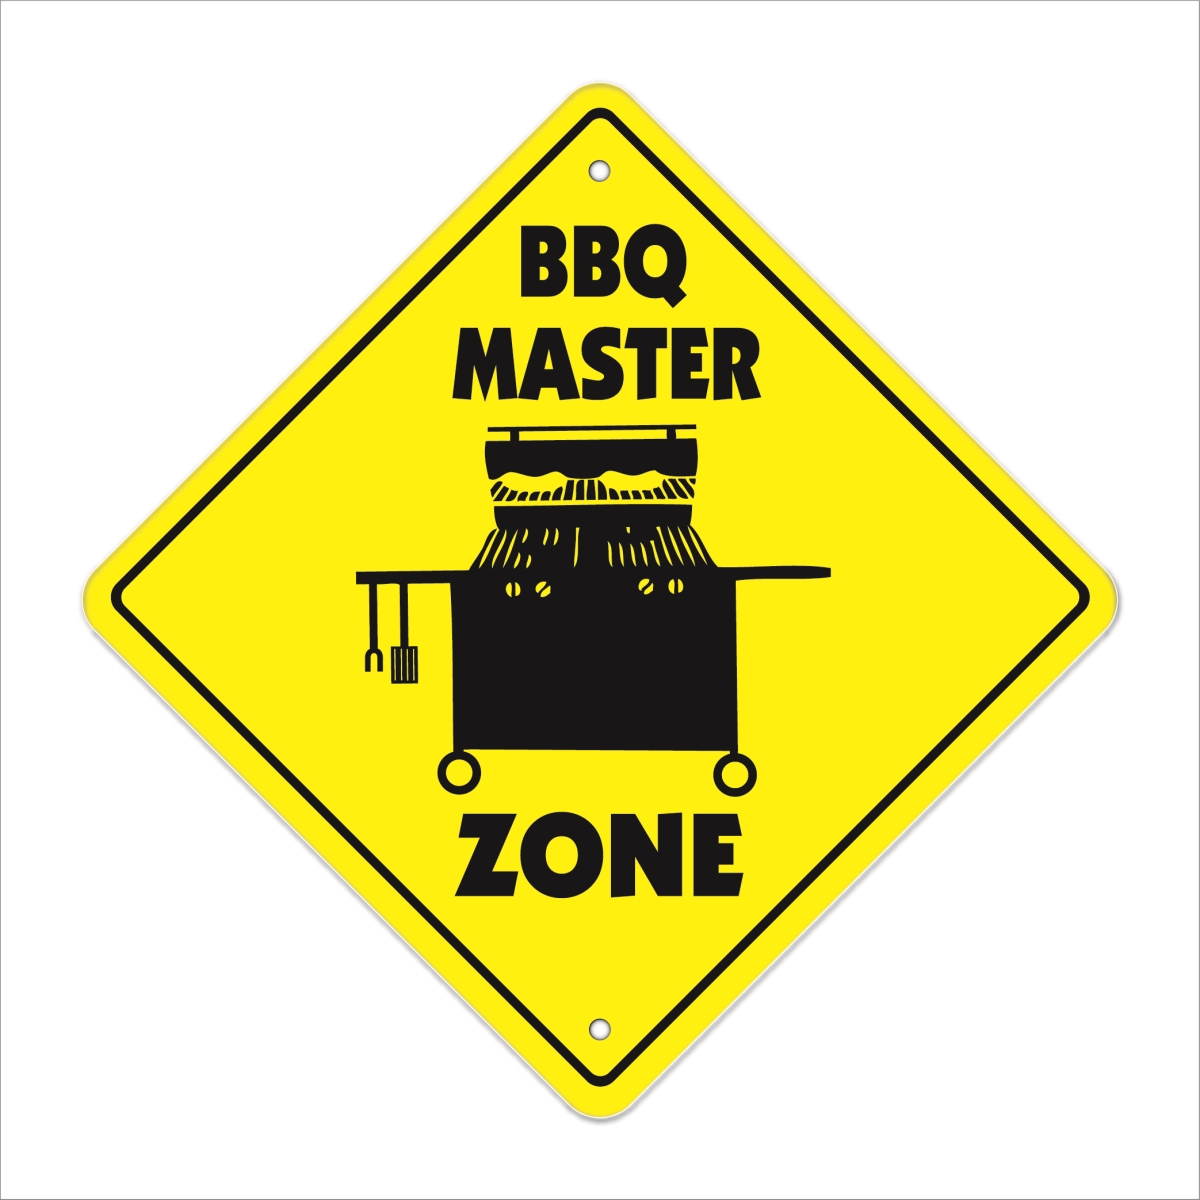 Amistad 12 x 12 in. Zone Xing Crossing Sign - BBQ Master